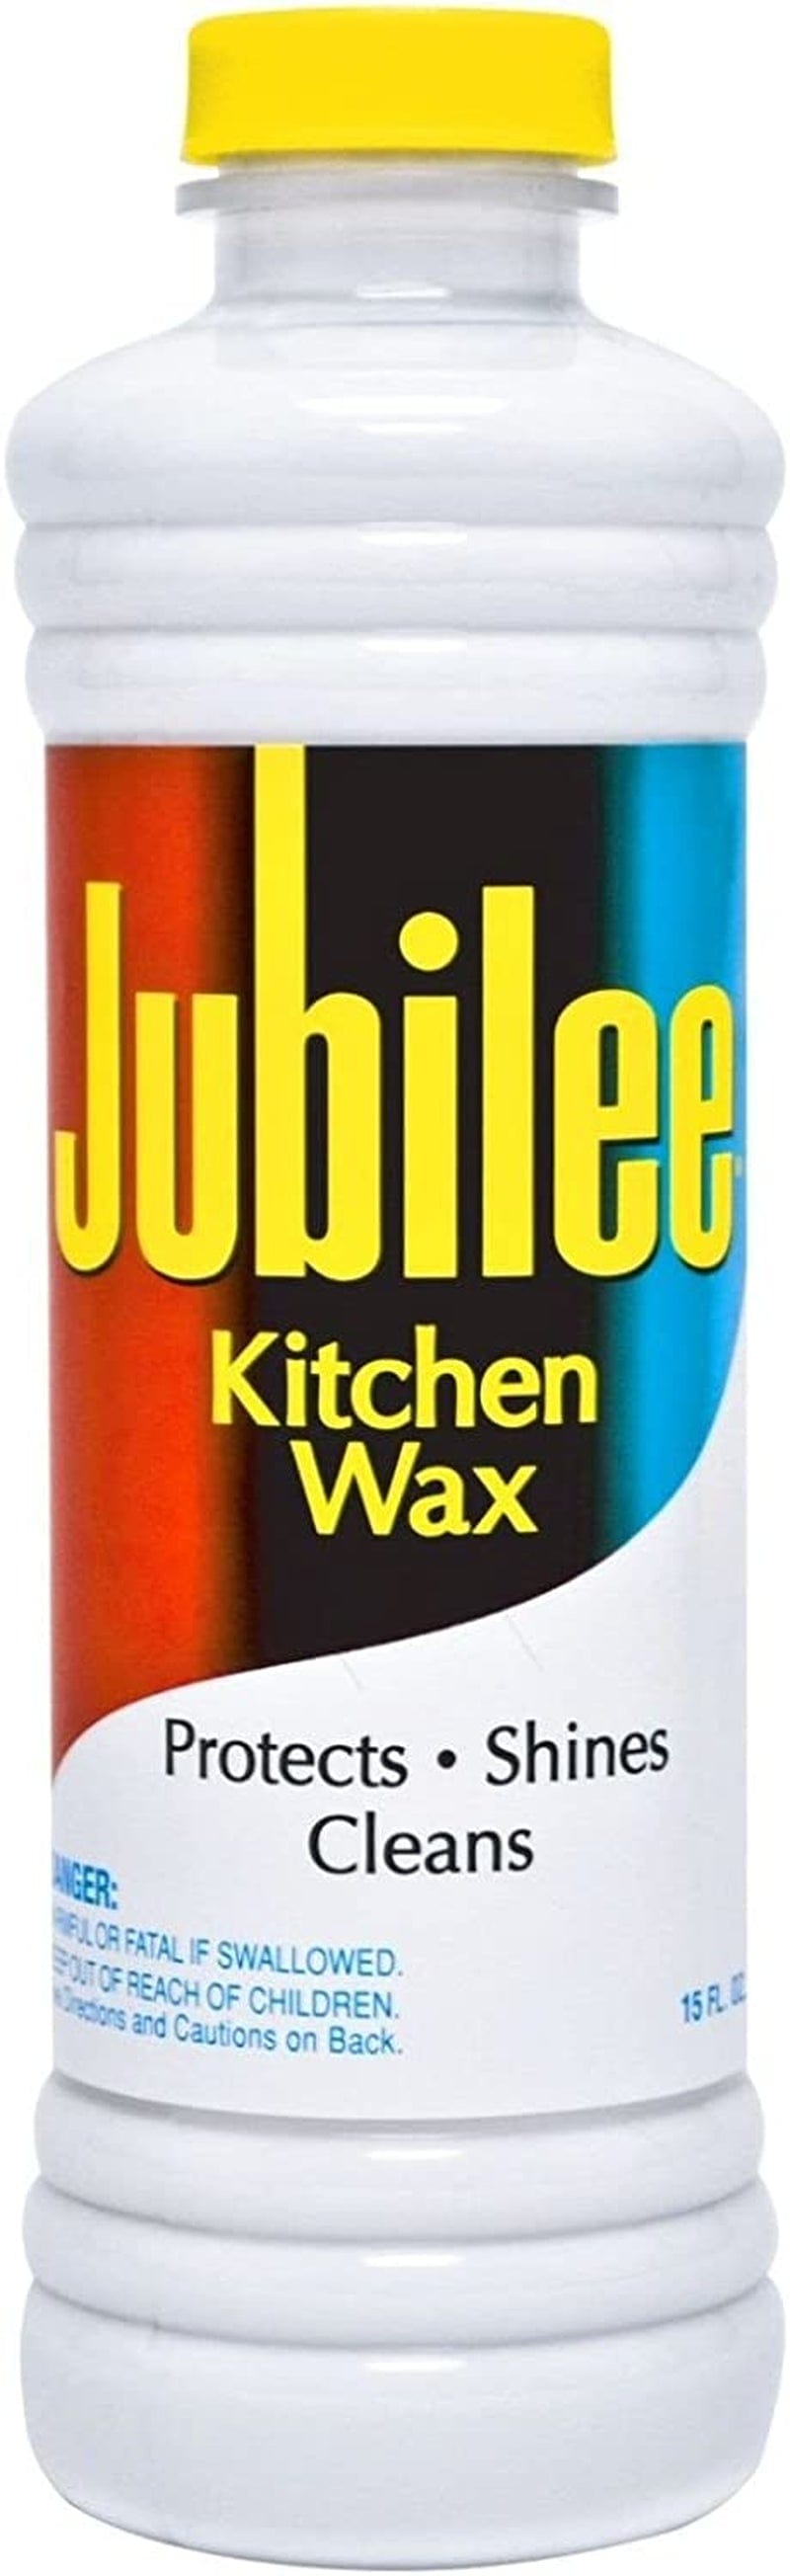 Jubilee Kitchen Cleaning Wax - for Appliances, Surfaces & Bathroom 15 Oz (Pack of 2)